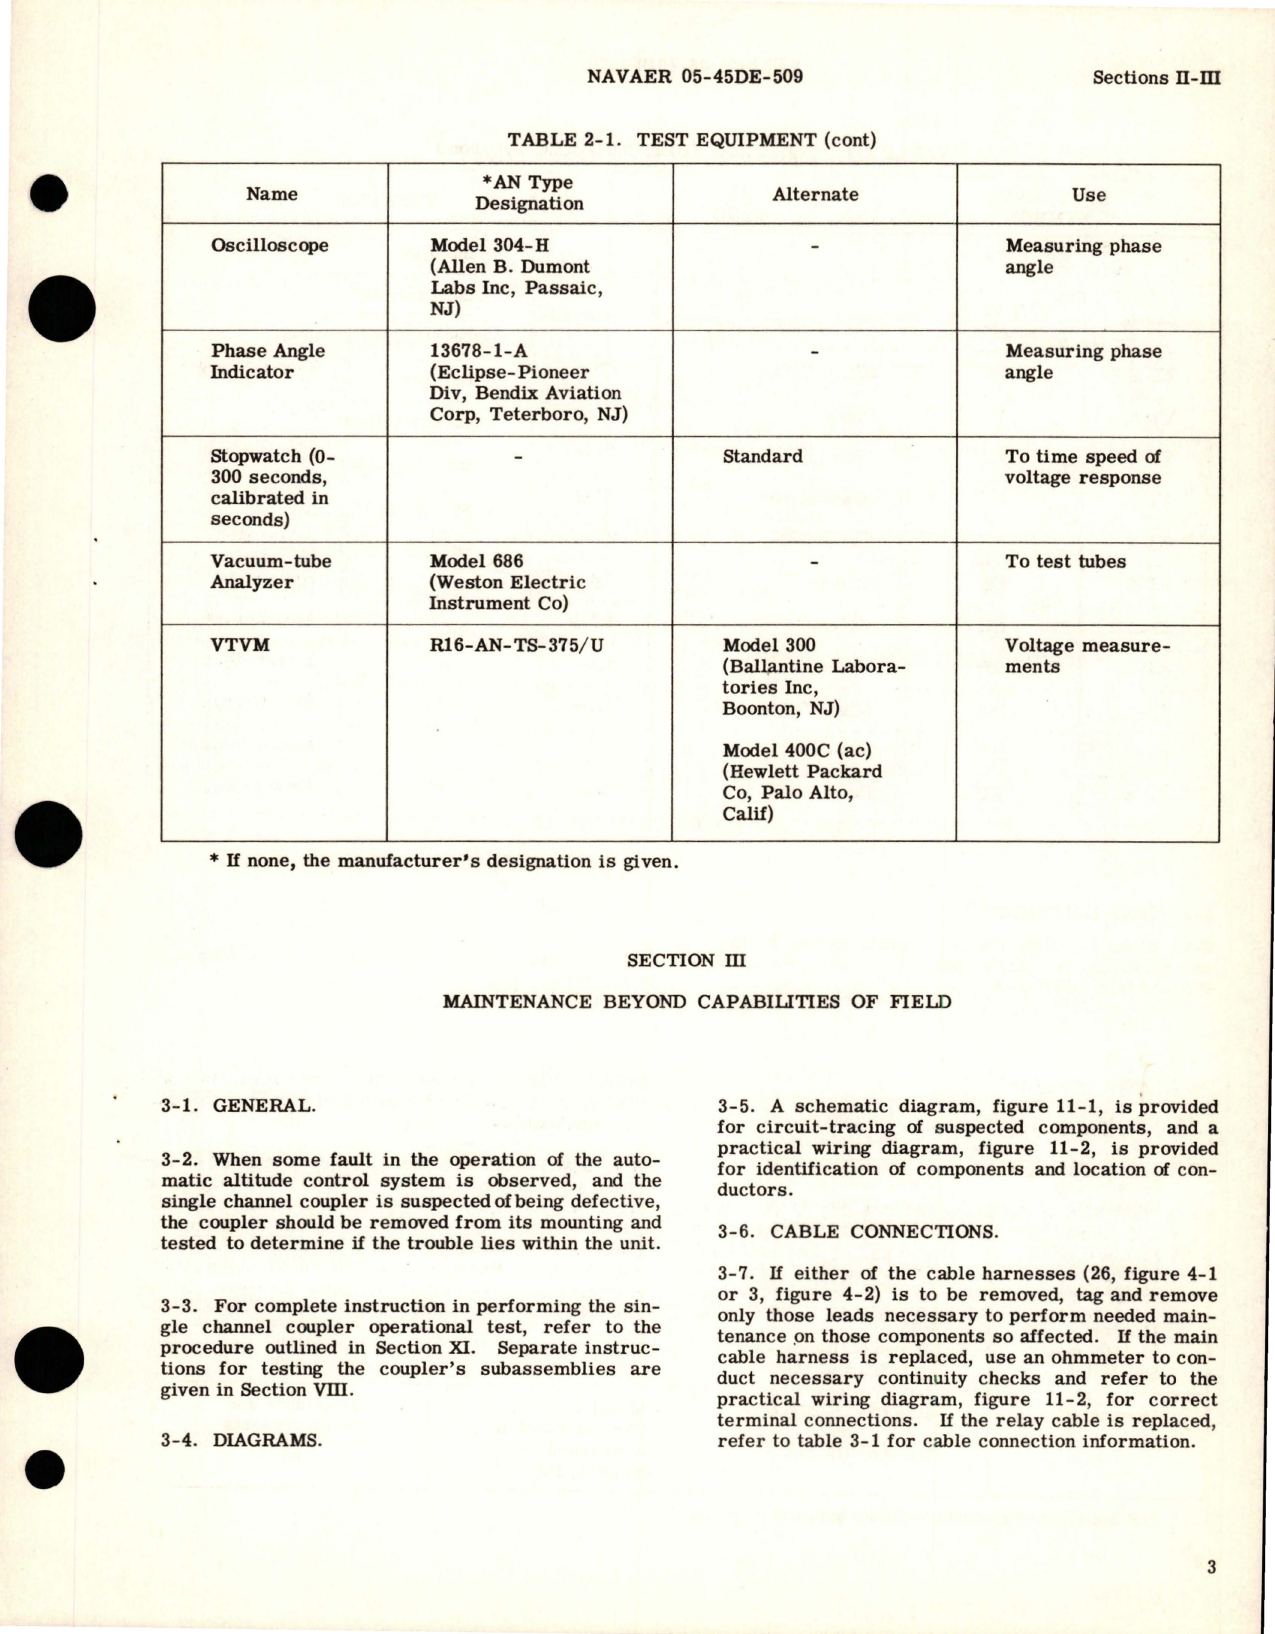 Sample page 7 from AirCorps Library document: Overhaul Instructions for Single Channel Coupler - Part 16007-1-A